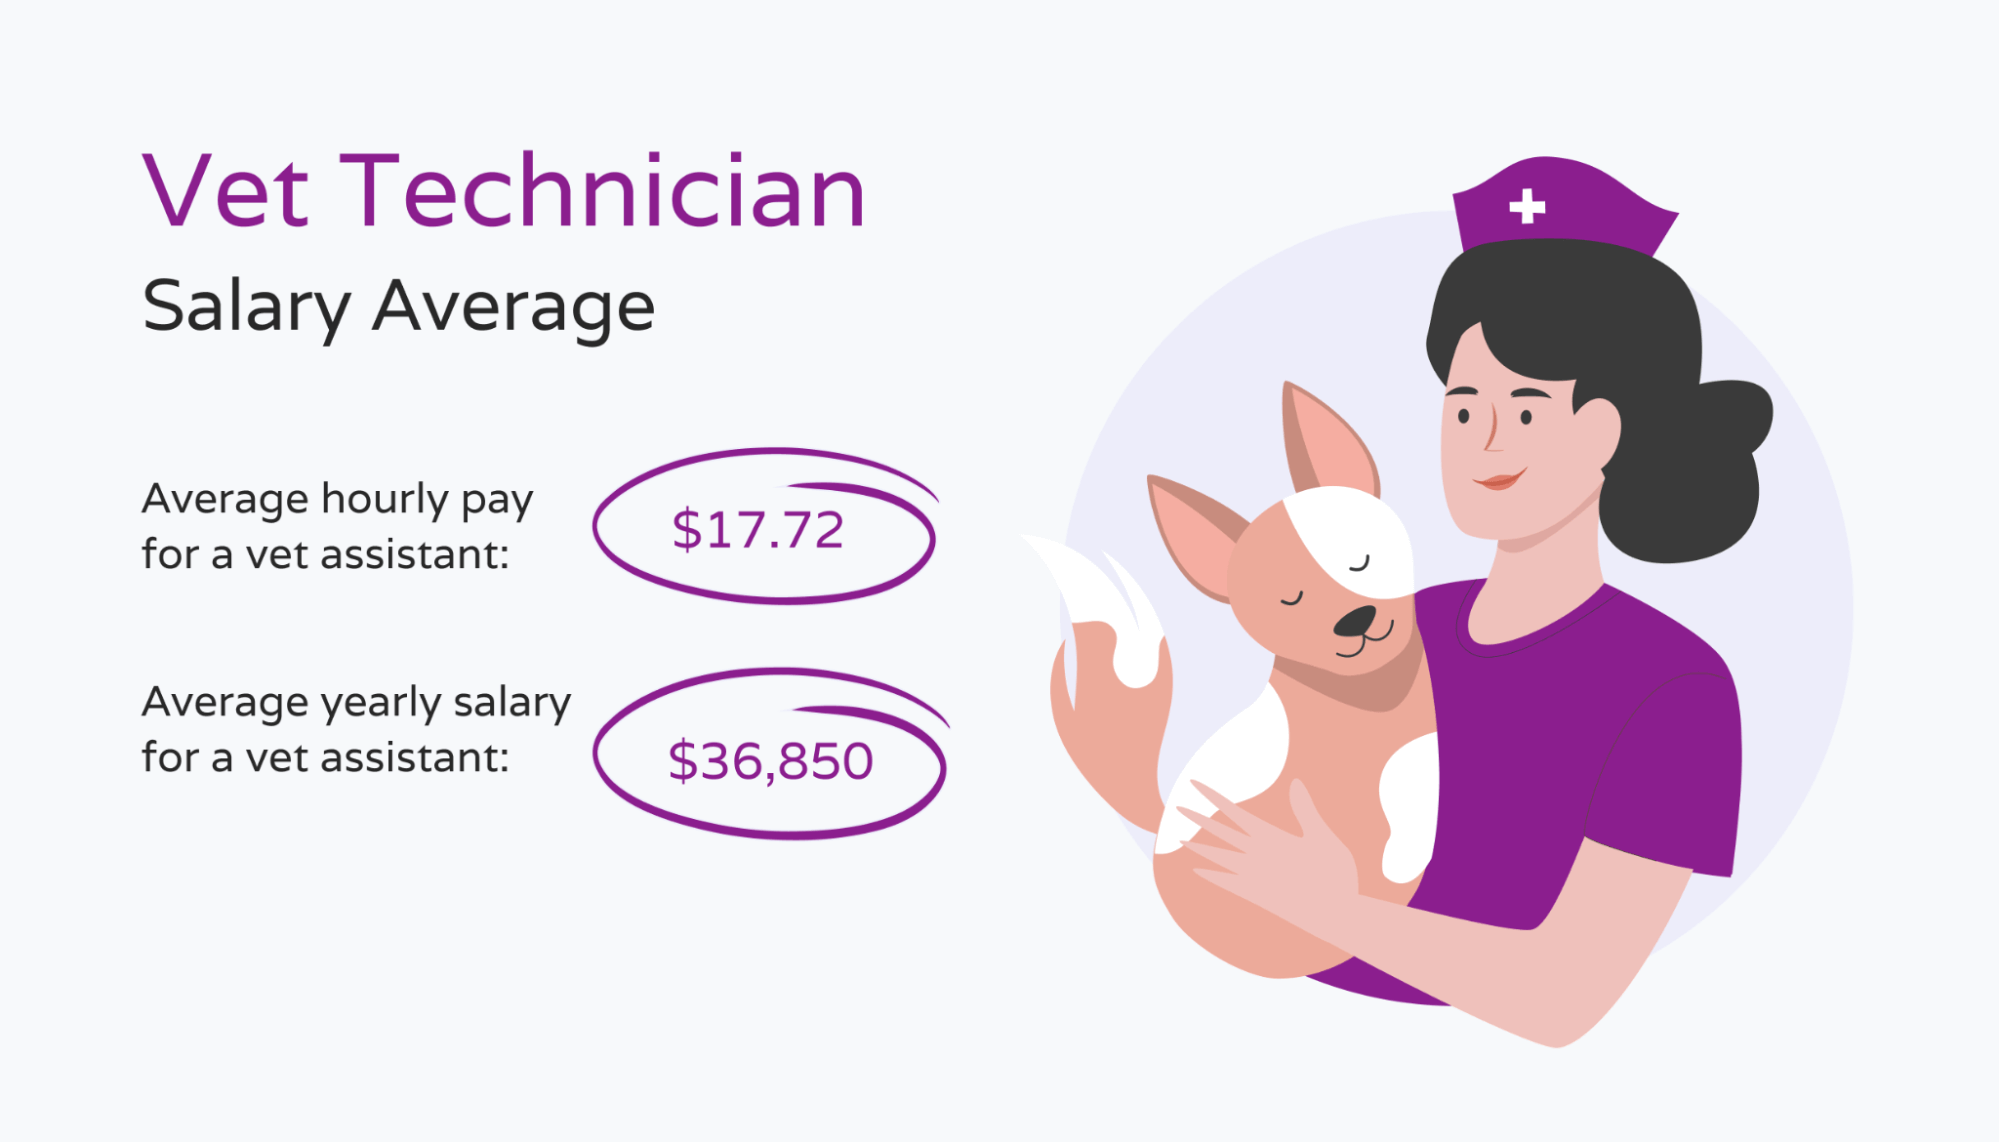 Average hourly and yearly salary of a veterinary technician